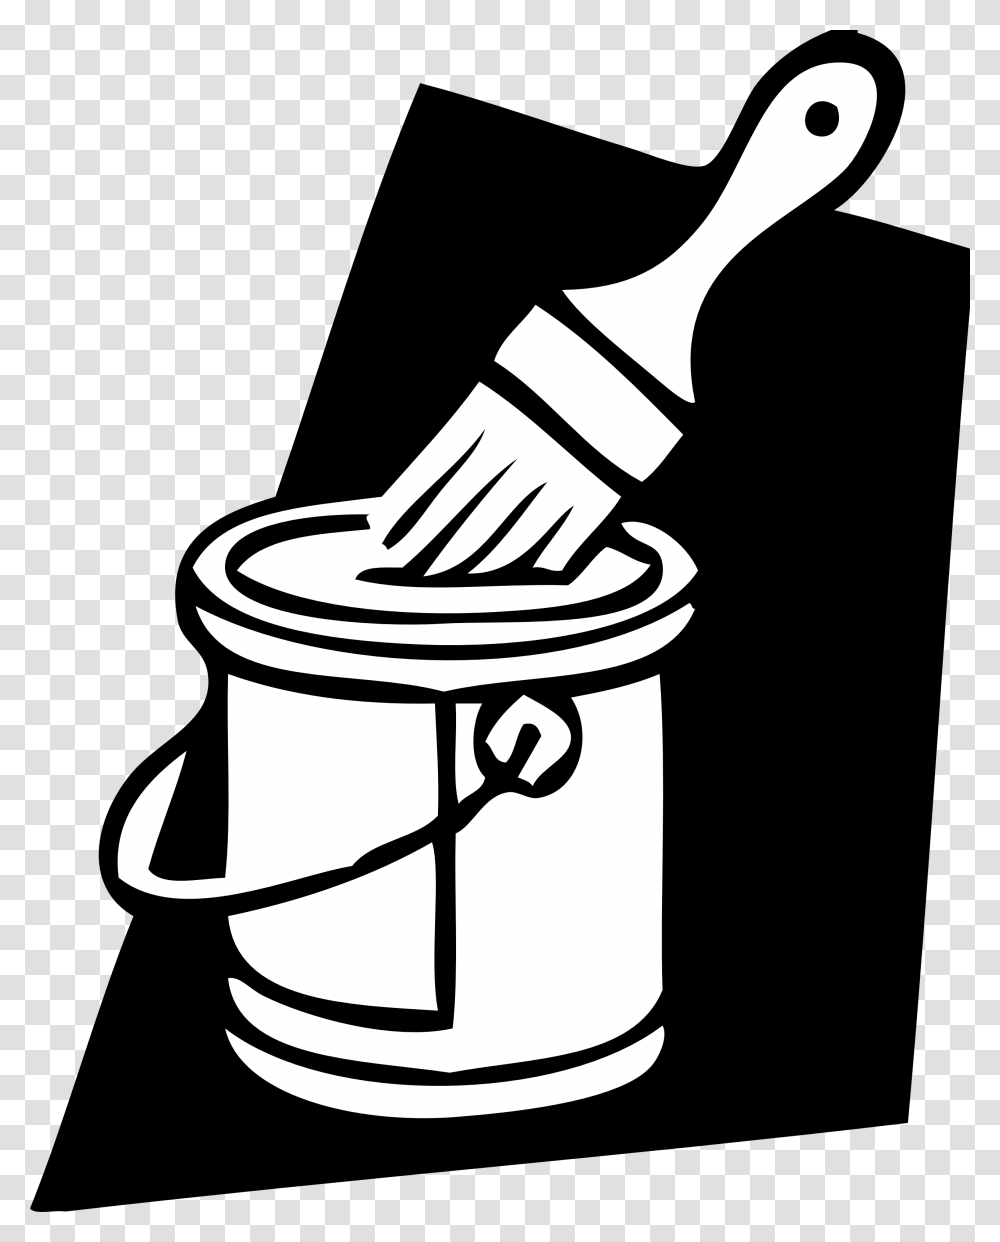 Paint Clipart Microsoft Office Paint Can And Brush Clip Art, Axe, Tool, Bucket Transparent Png